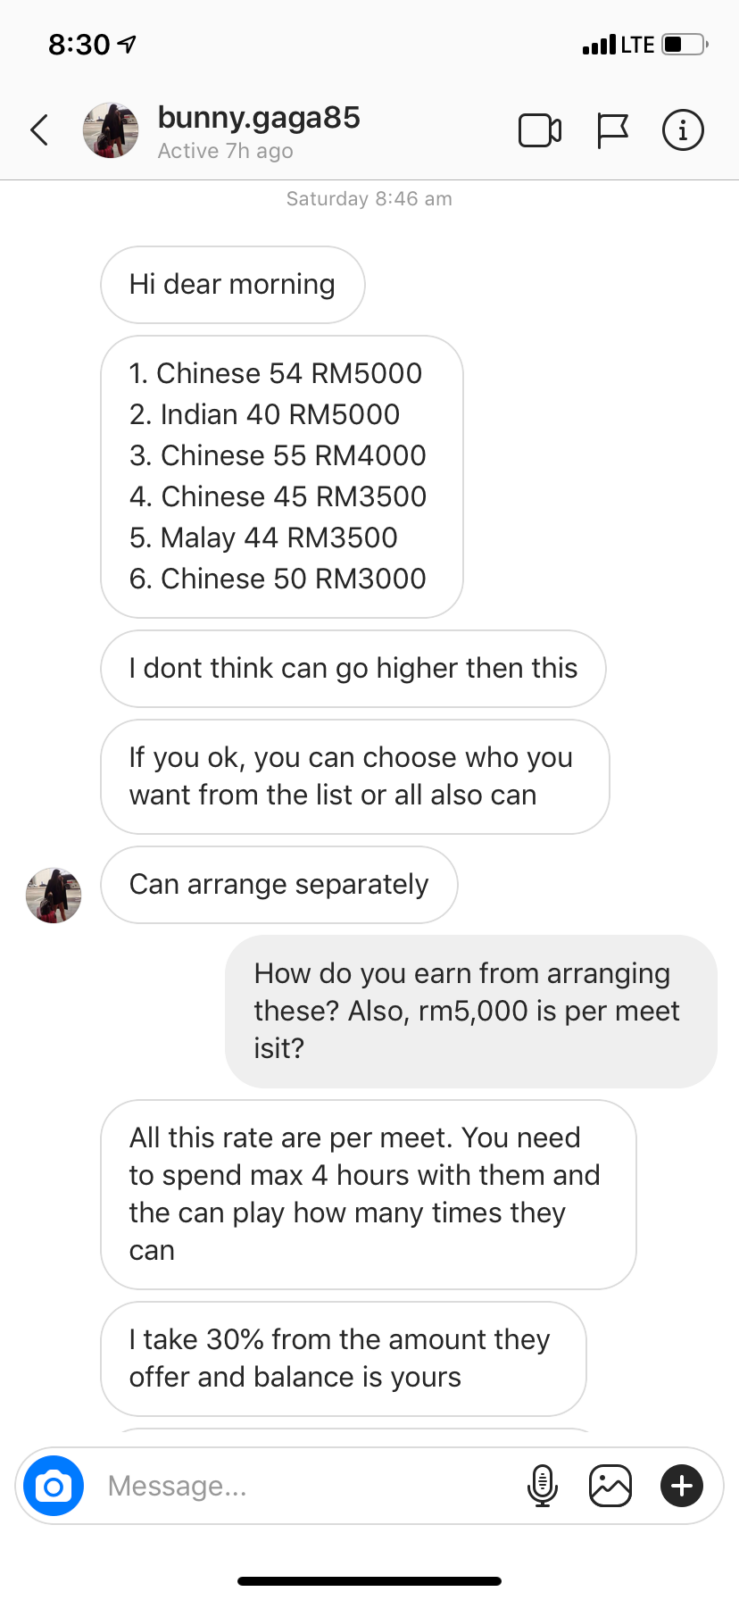 A Sugar Daddy Agent Messaged Me on Instagram and Said I Could Earn RM40,000 A Month - WORLD OF BUZZ 6